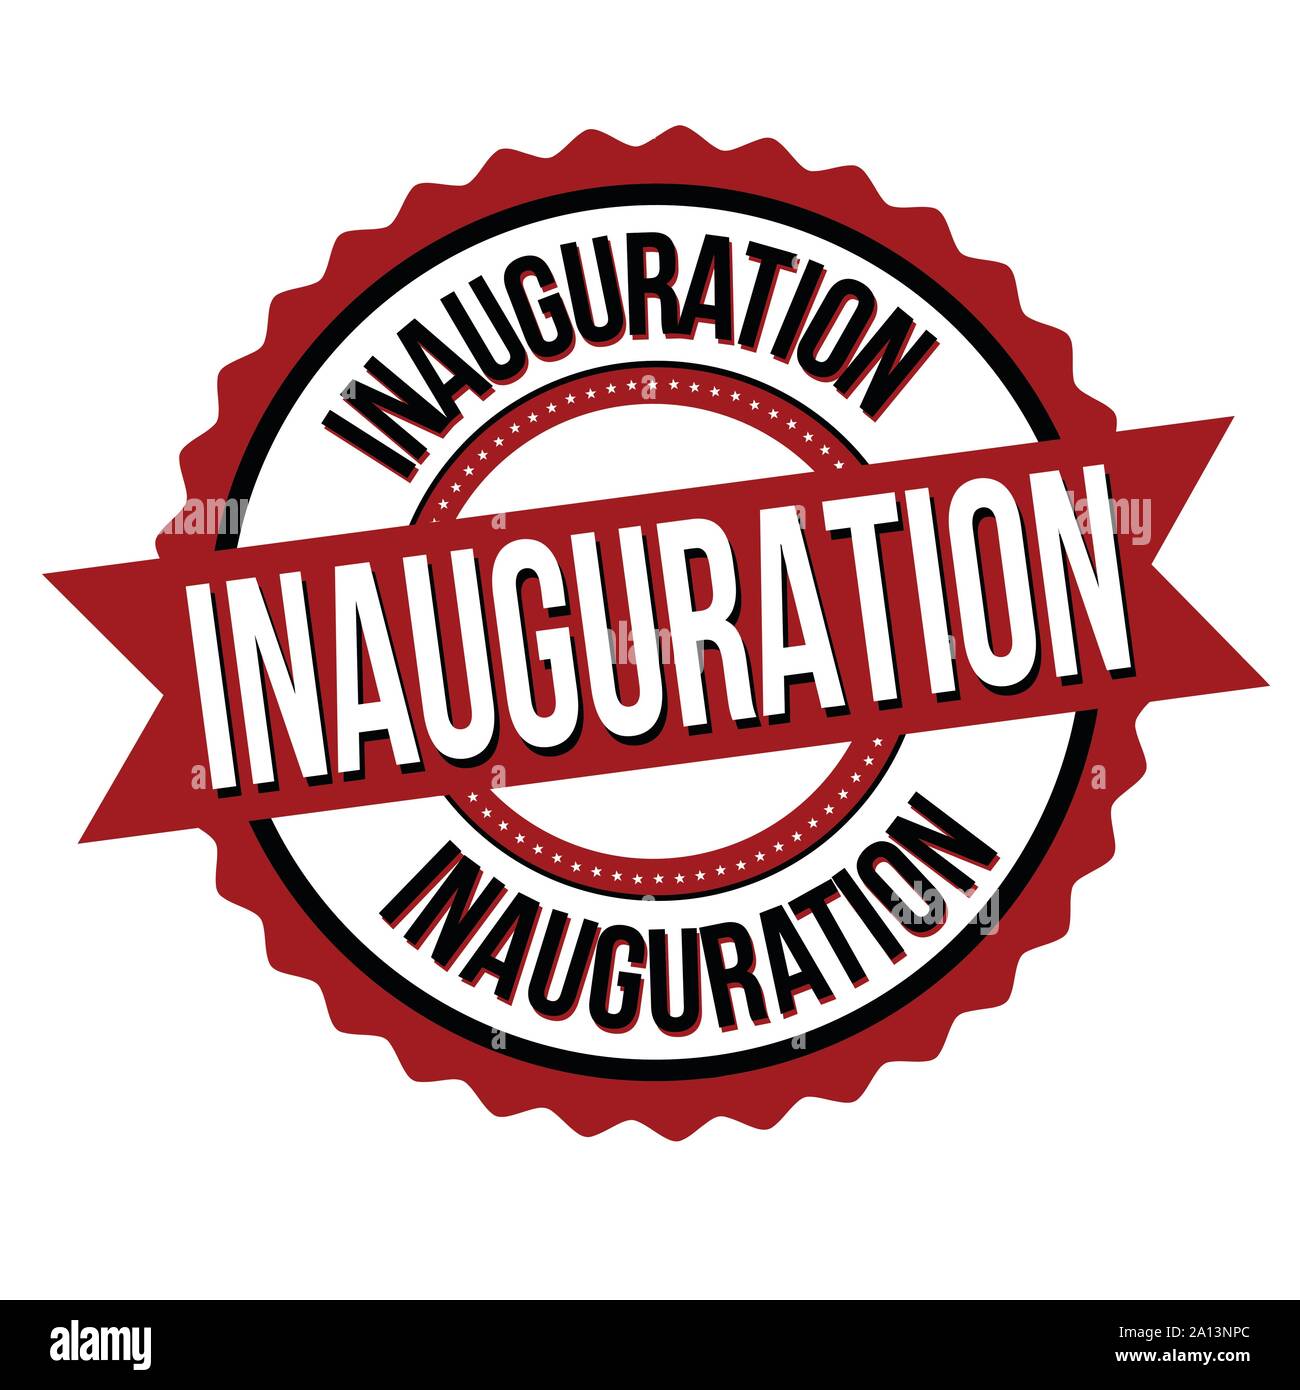 Inauguration label or sticker on white background, vector illustration Stock Vector